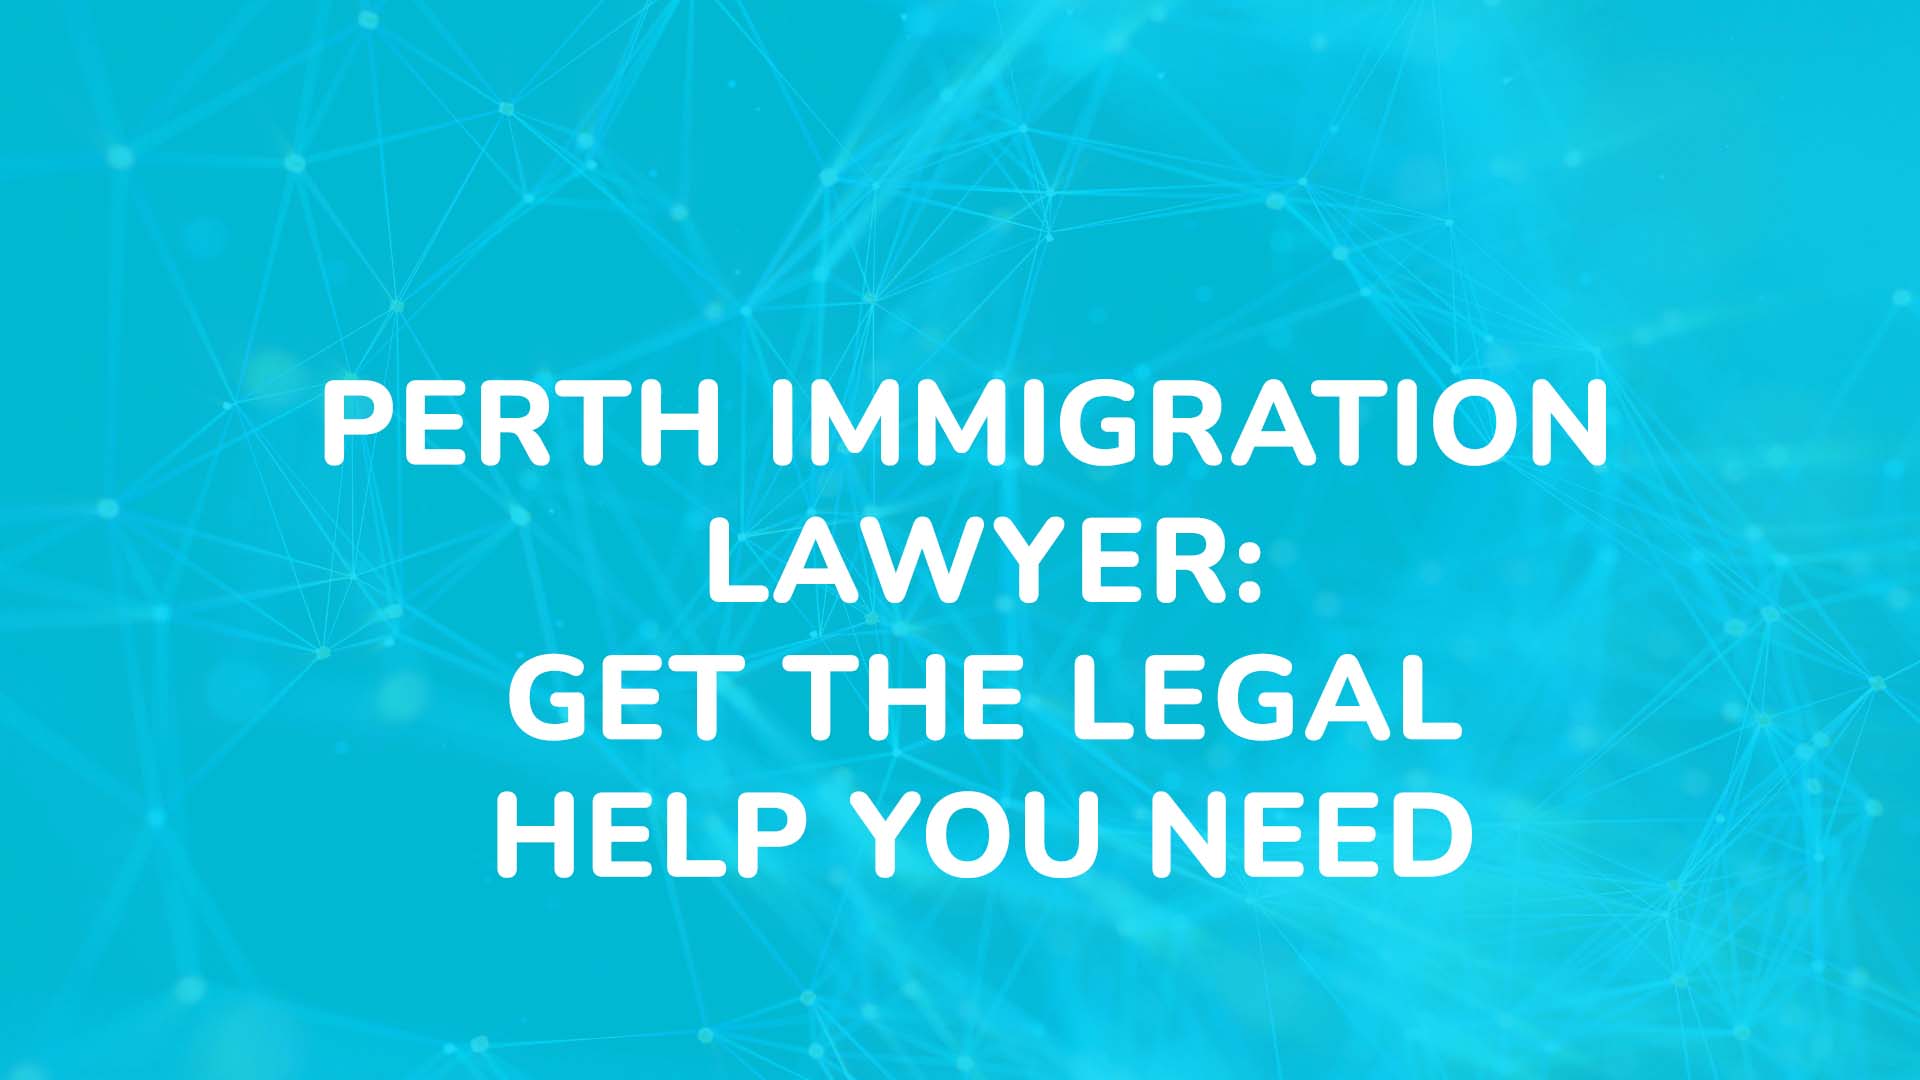 Perth Immigration Lawyer Get the Legal Help You Need